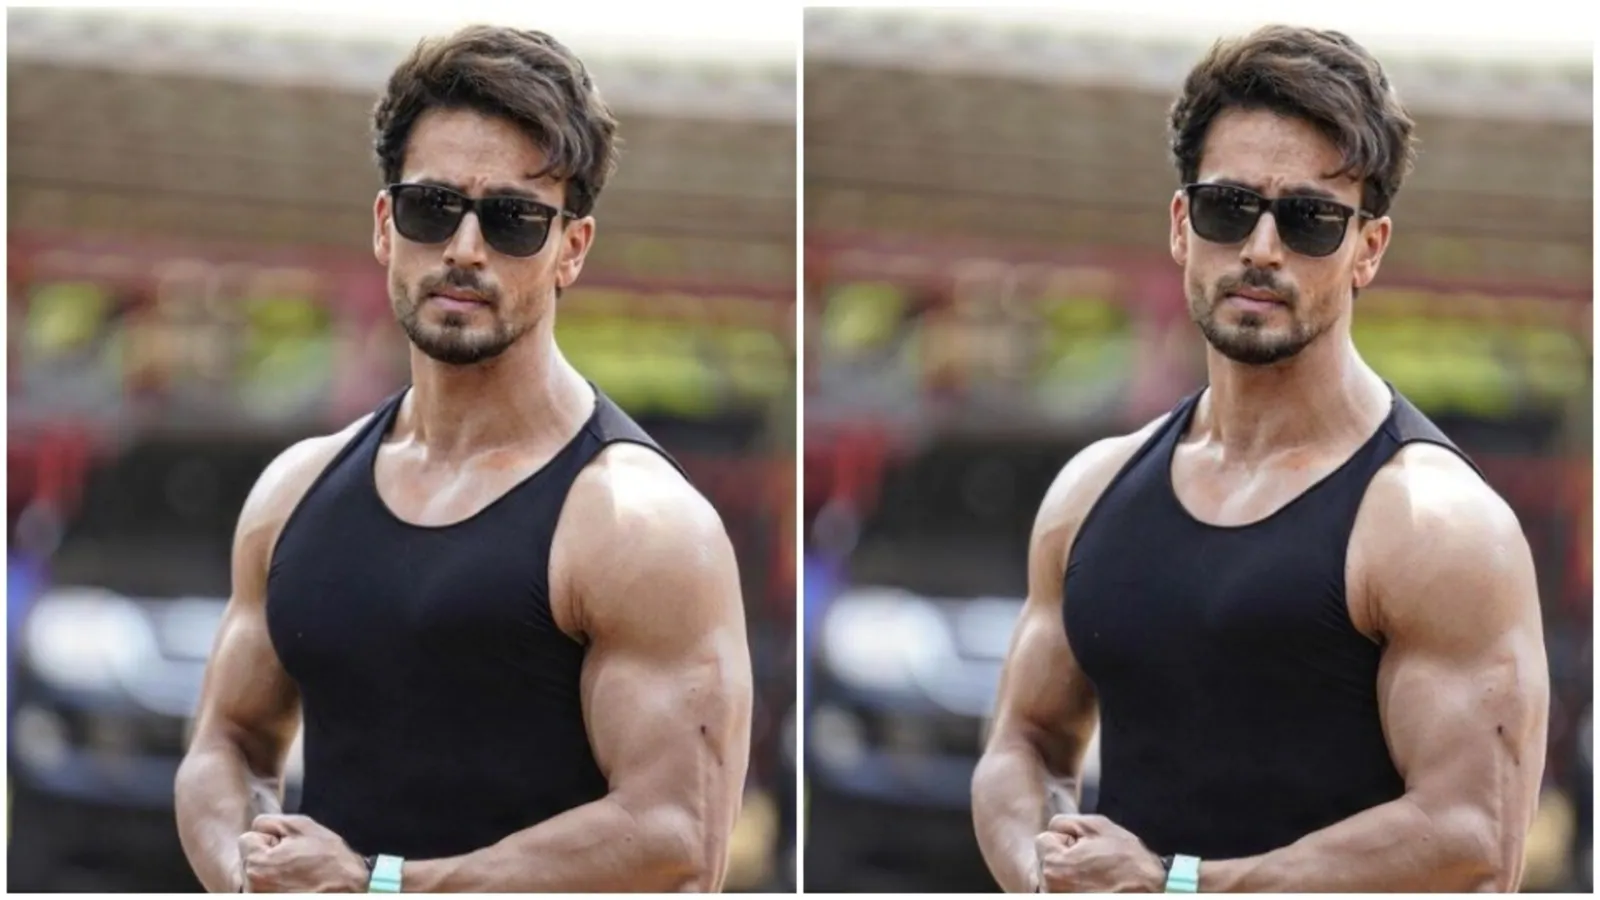 Tiger Shroff’s back workout in the gym is making us swoon